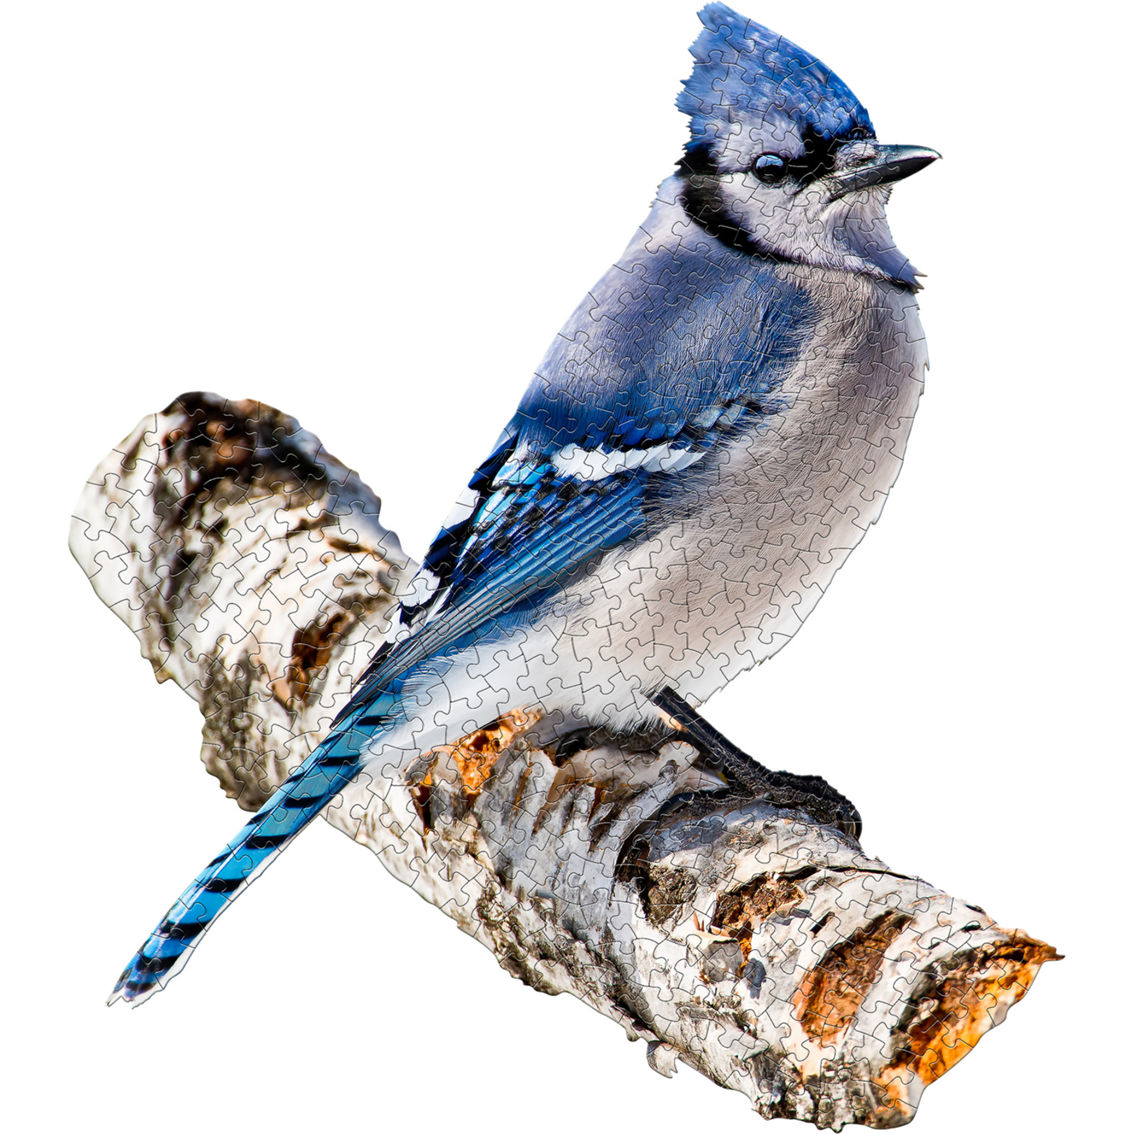 Madd Capp: I Am Blue Jay 300 pc Puzzle - Image 3 of 4